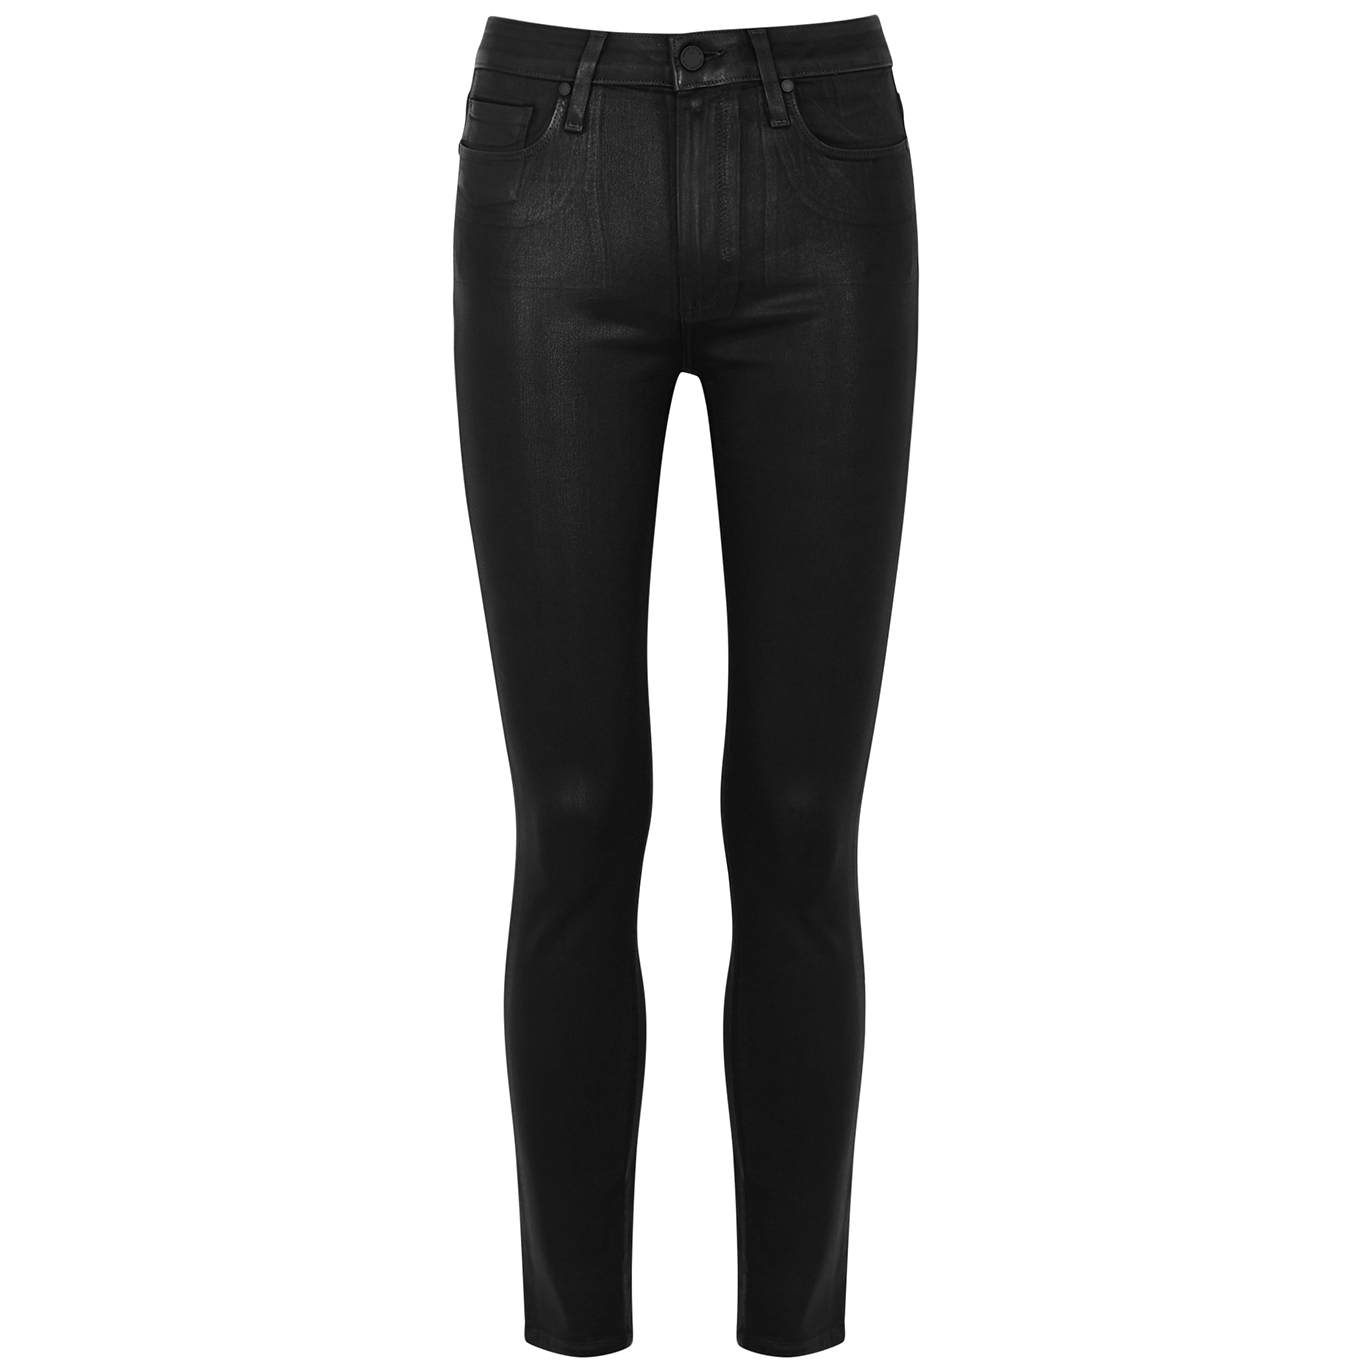 Paige Hoxton Ankle Black Coated Skinny Jeans - W31